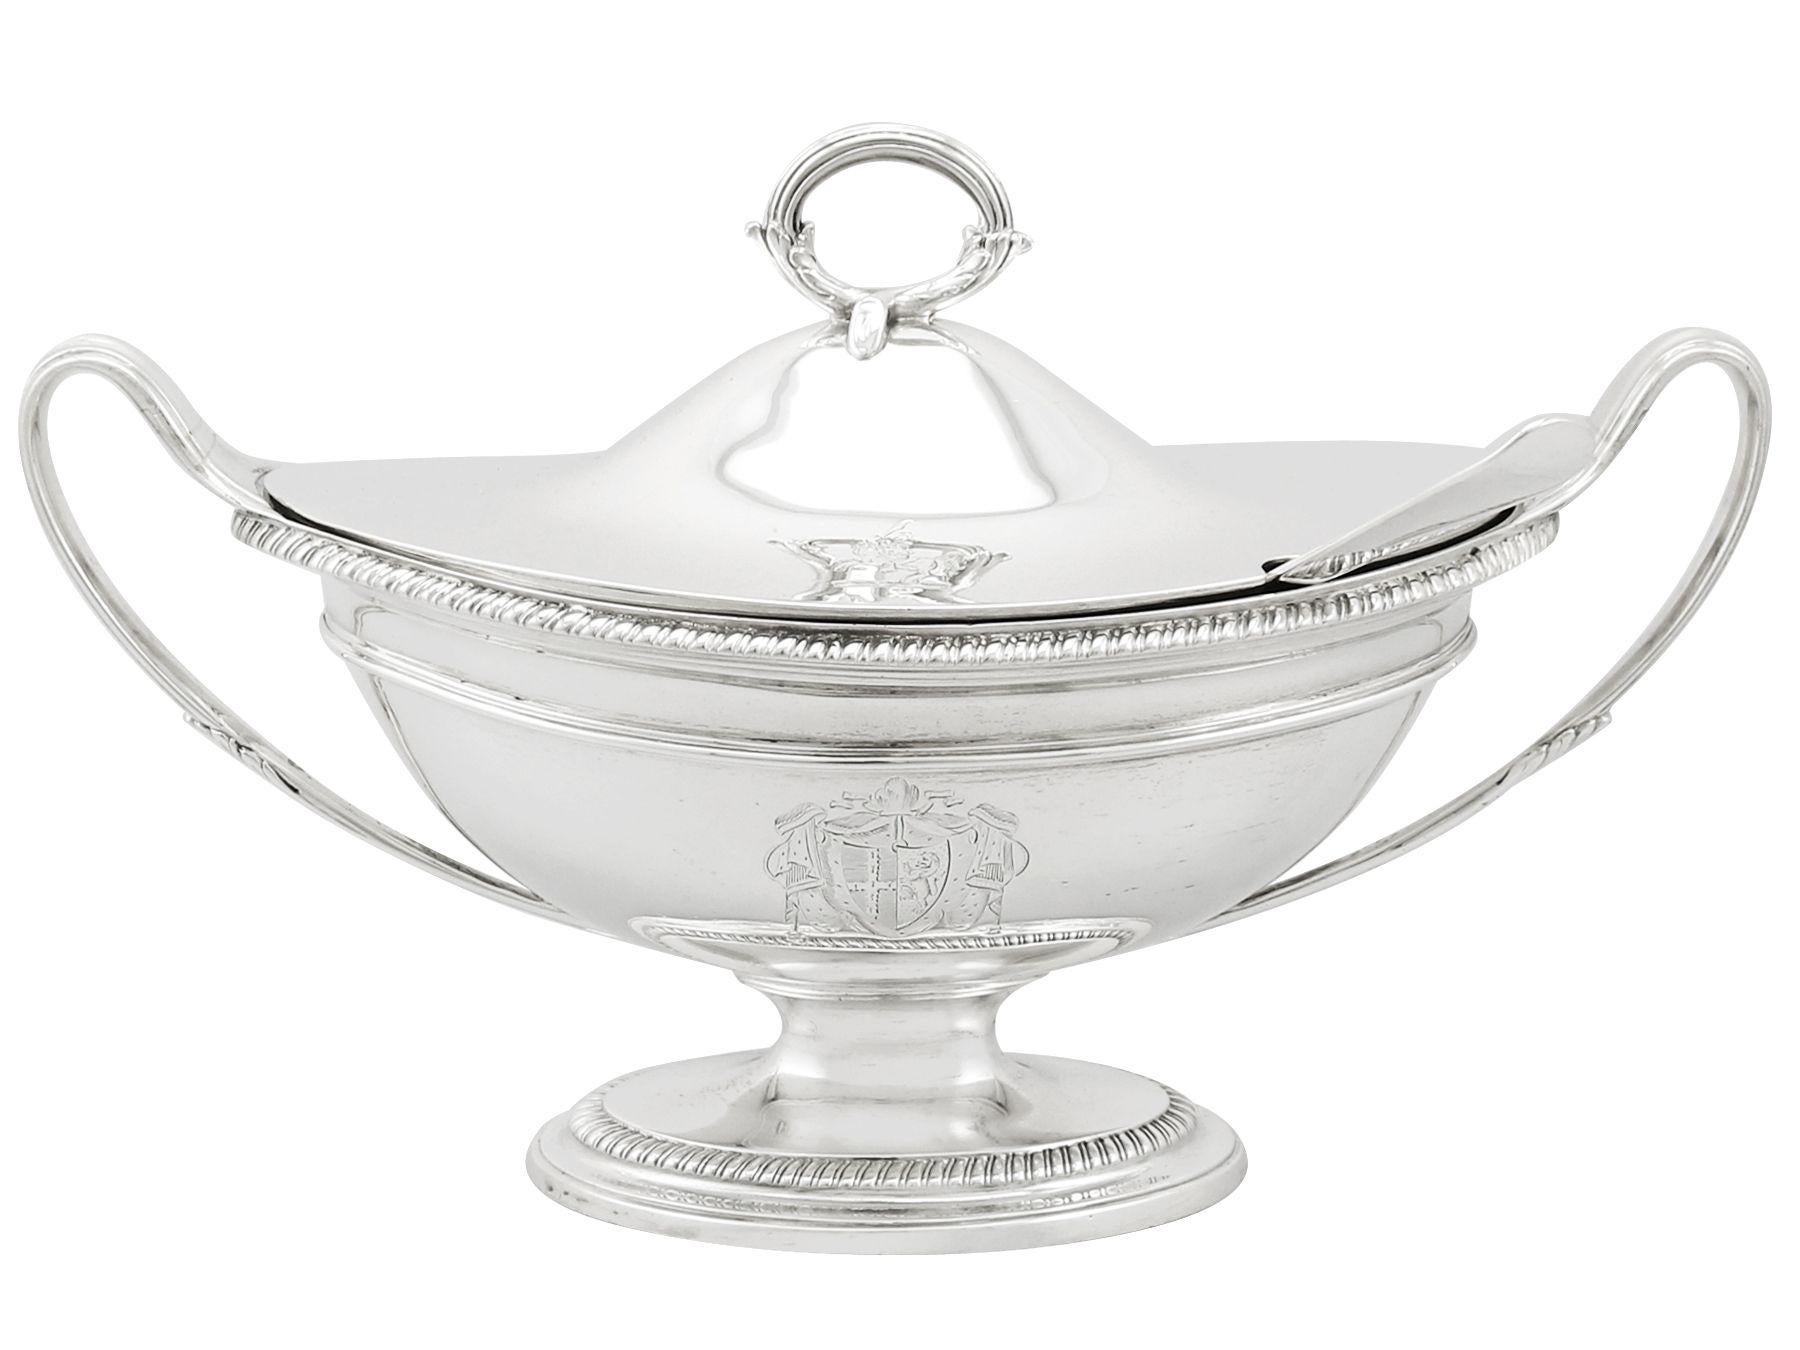 Antique Georgian 1790s Sterling Silver Sauce Tureens with Ladles In Excellent Condition For Sale In Jesmond, Newcastle Upon Tyne